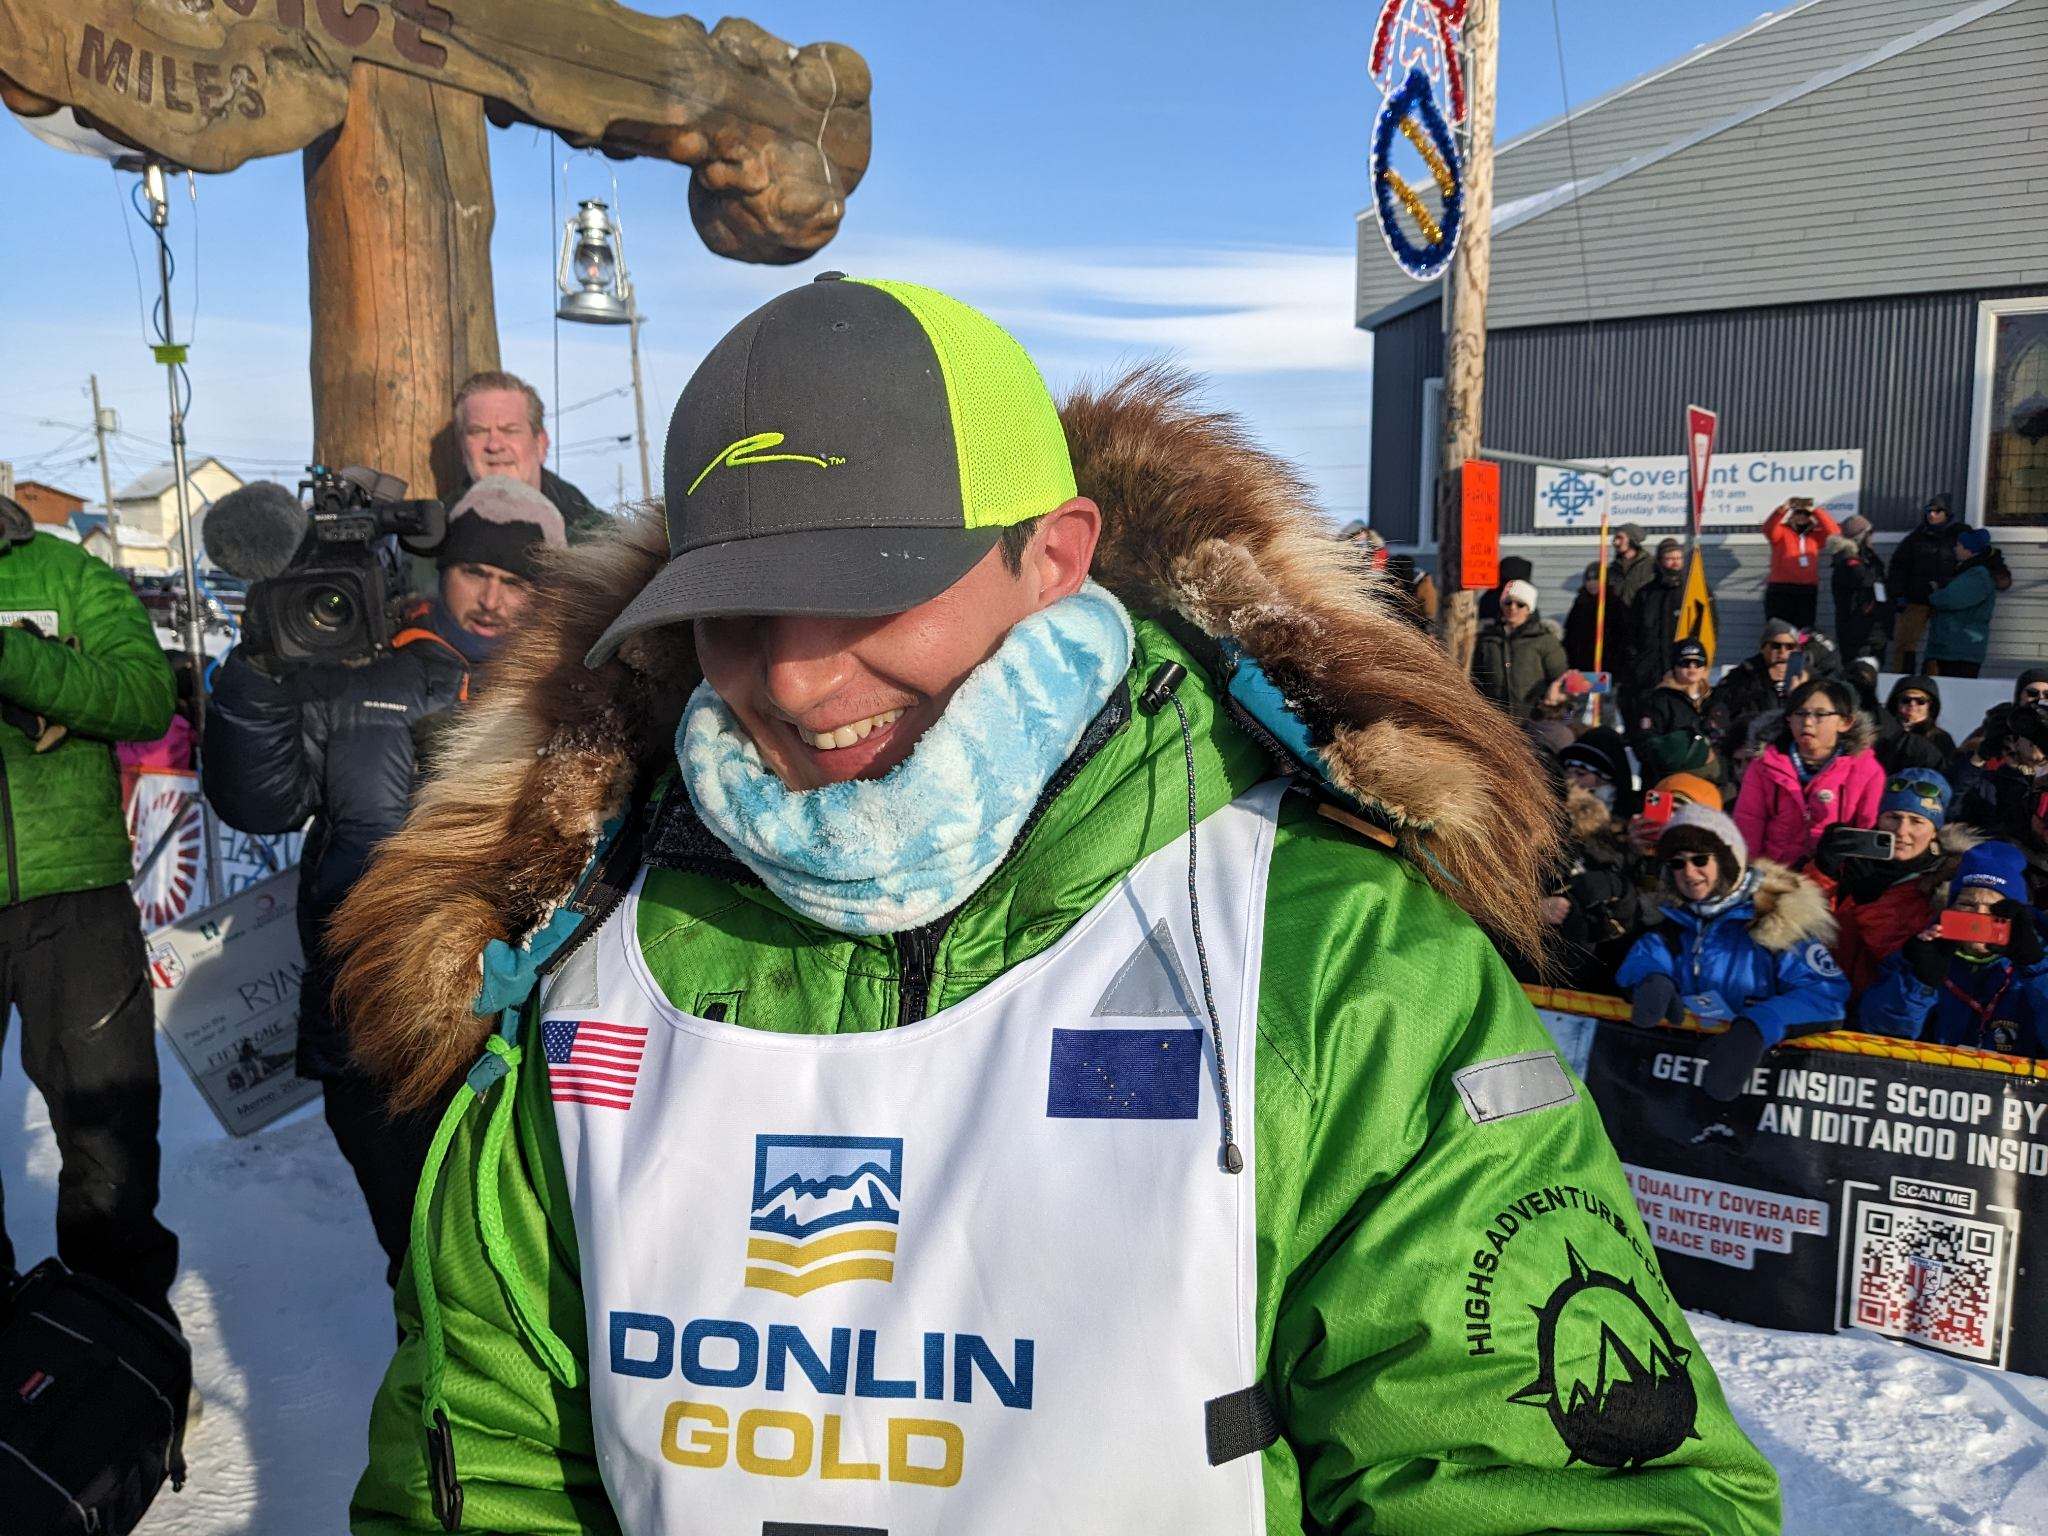 a musher in a green jacket